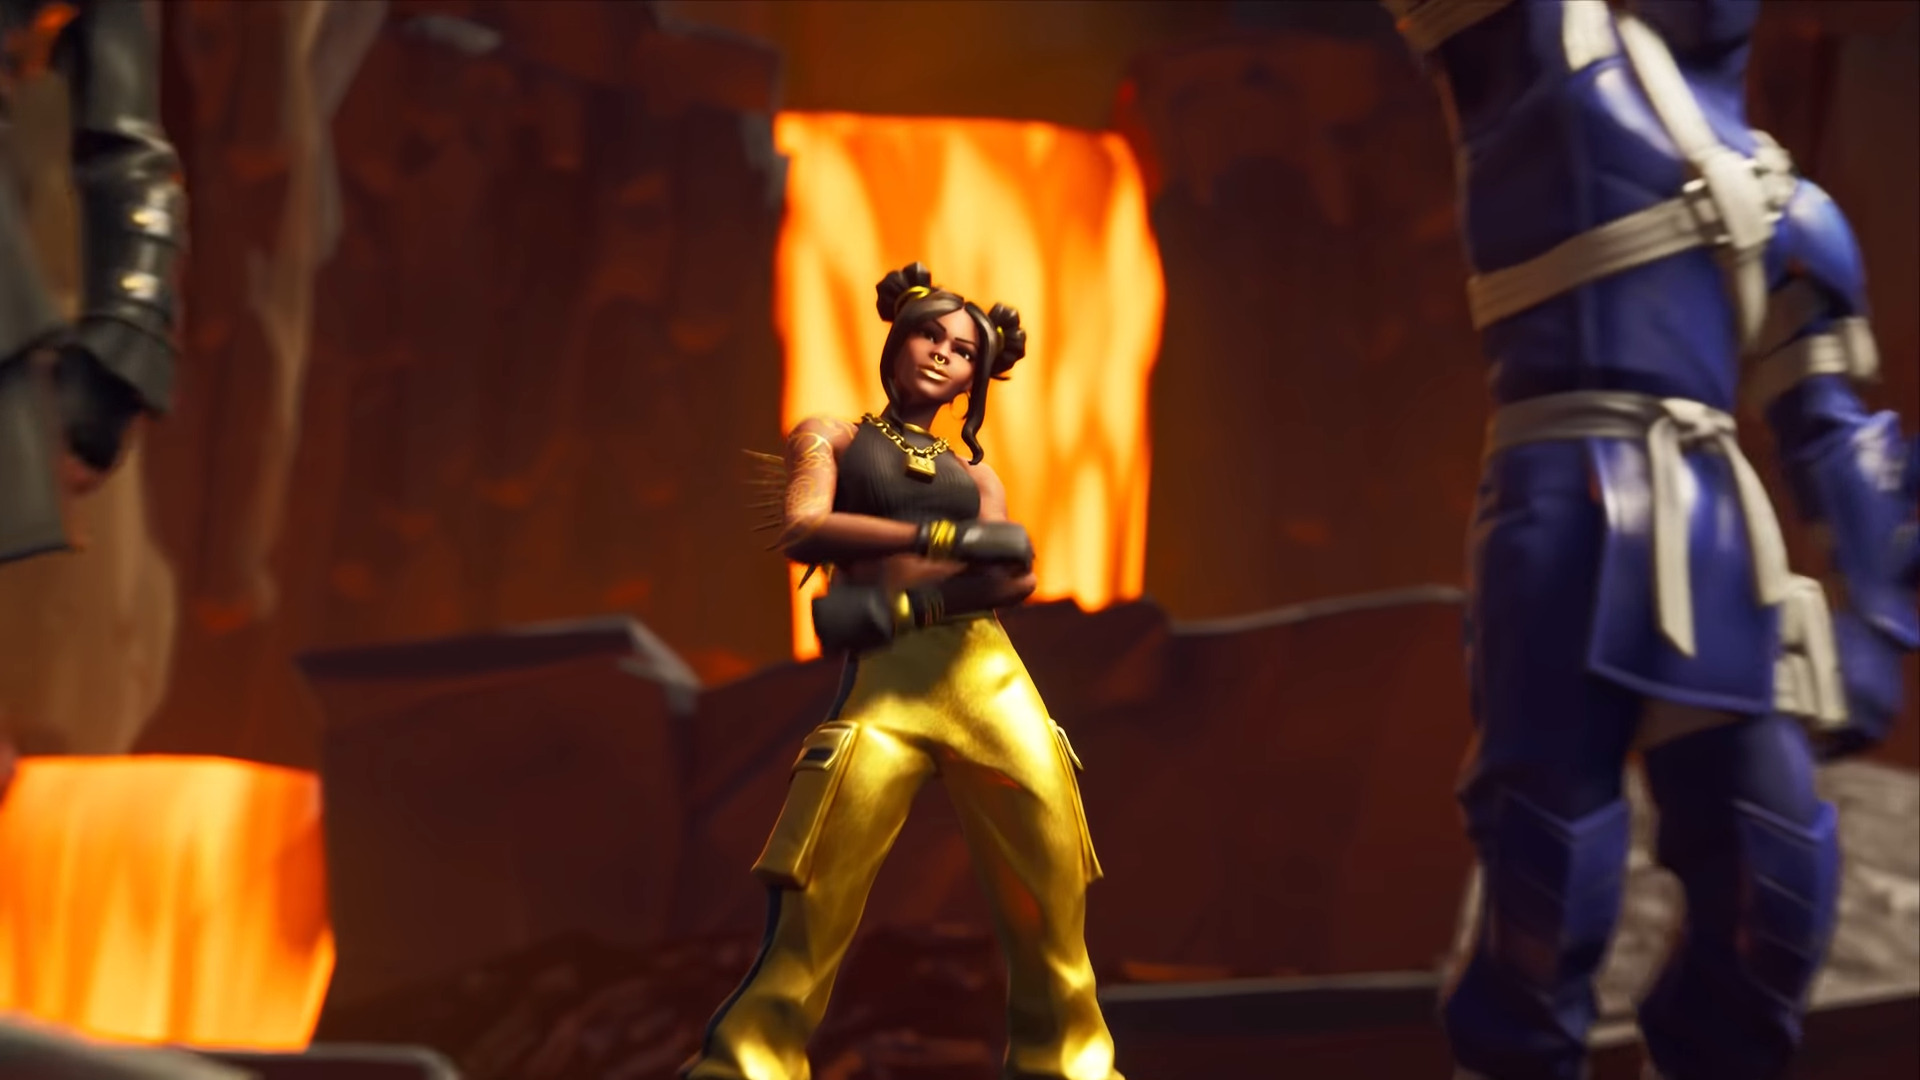 Free download Luxe Fortnite Skin How To Get It Wallpapers ... - 1920 x 1080 jpeg 265kB